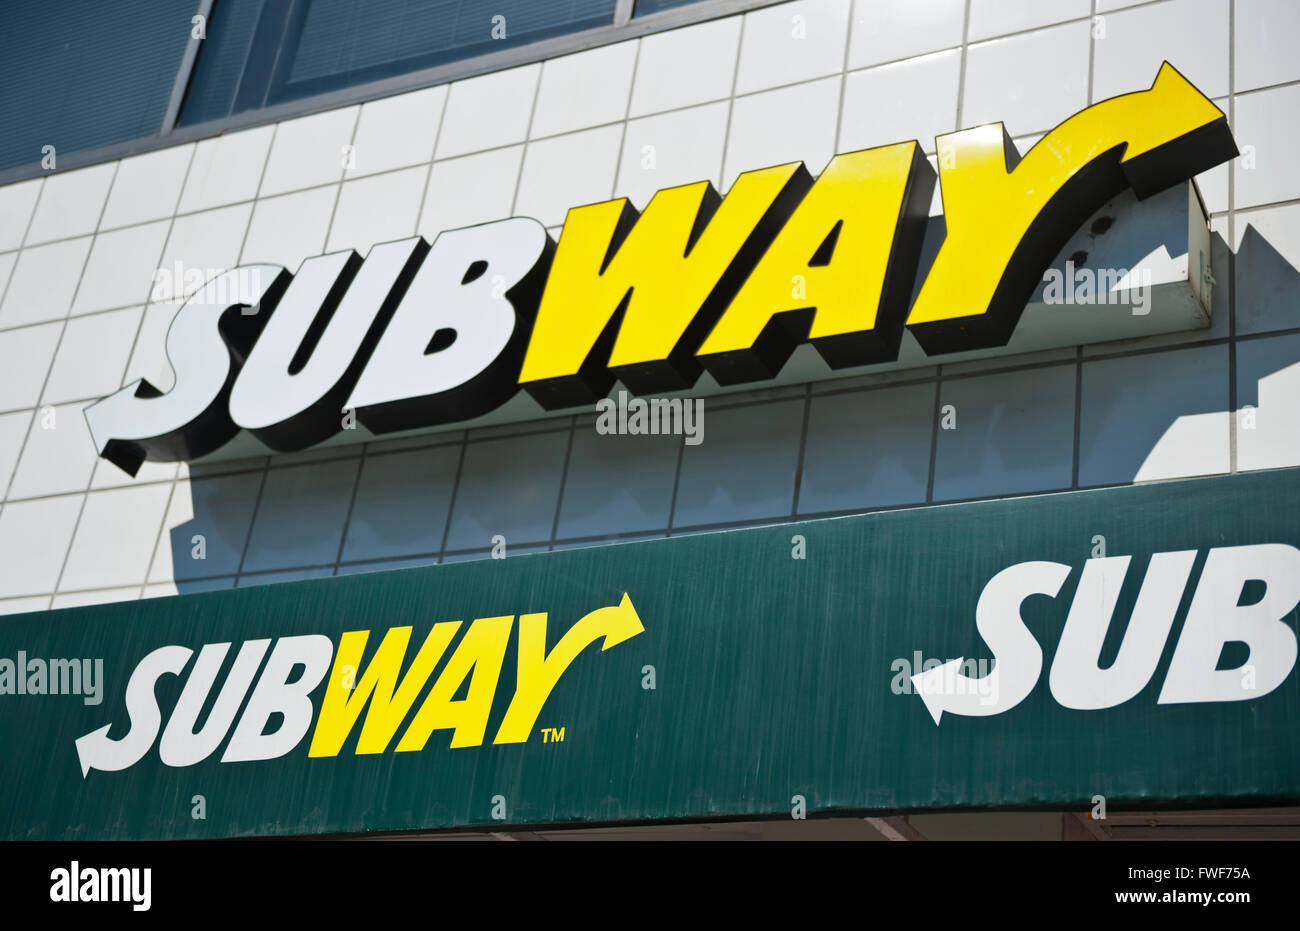 A sign for subway fast food restaurant in Long Beach, California Stock Photo